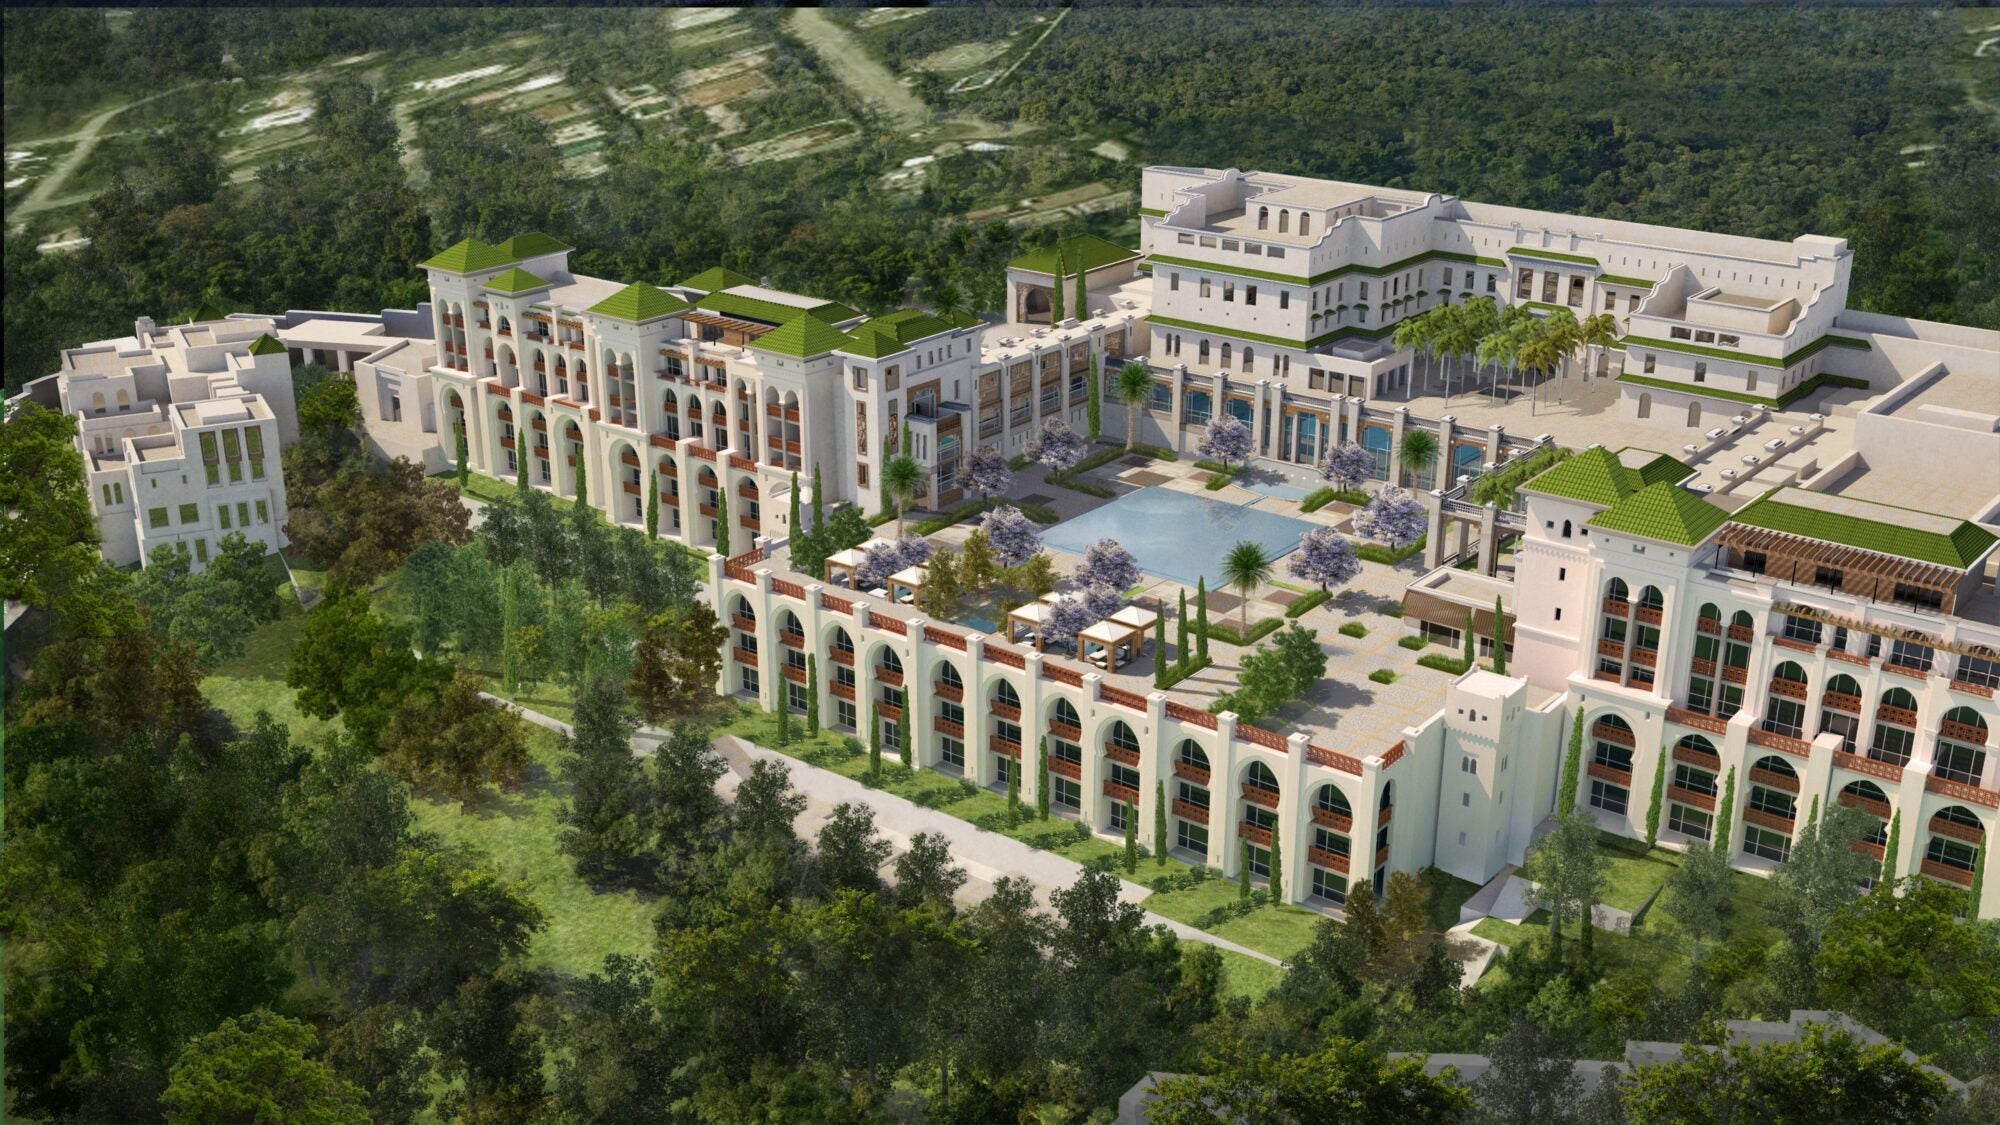 Fairmont Tazi Palace hotel opens in Tangier, Morocco